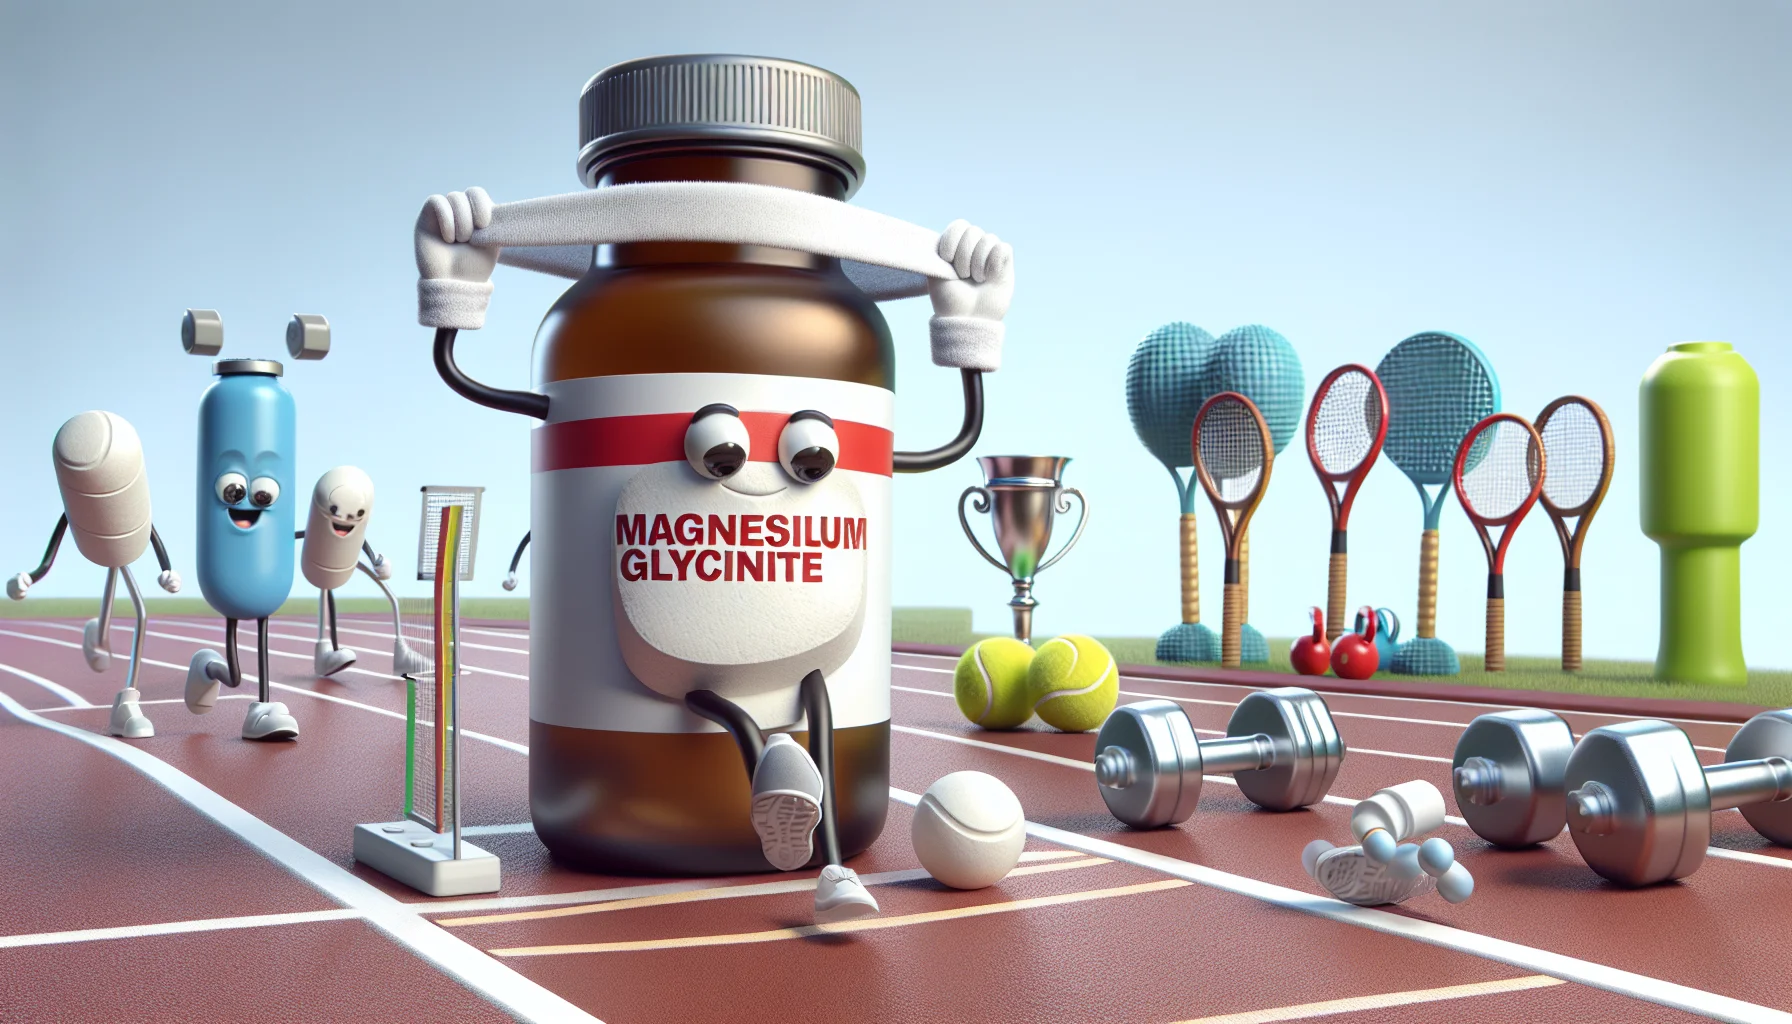 Create a realistic image of a humorous scenario unfolding in connection to sports supplements, centred around a bottle of magnesium glycinate. Perhaps an animated rendering of a magnesium glycinate pill on a race track, putting on a sweatband with a look of determination, as if ready to take part in a high-intensity sporting event. On the side, various sports equipment like dumbbells and tennis rackets are cheerfully watching the race with anticipation. Remember, the aim is to make this scene inviting and fun to encourage people to consider sports supplements.